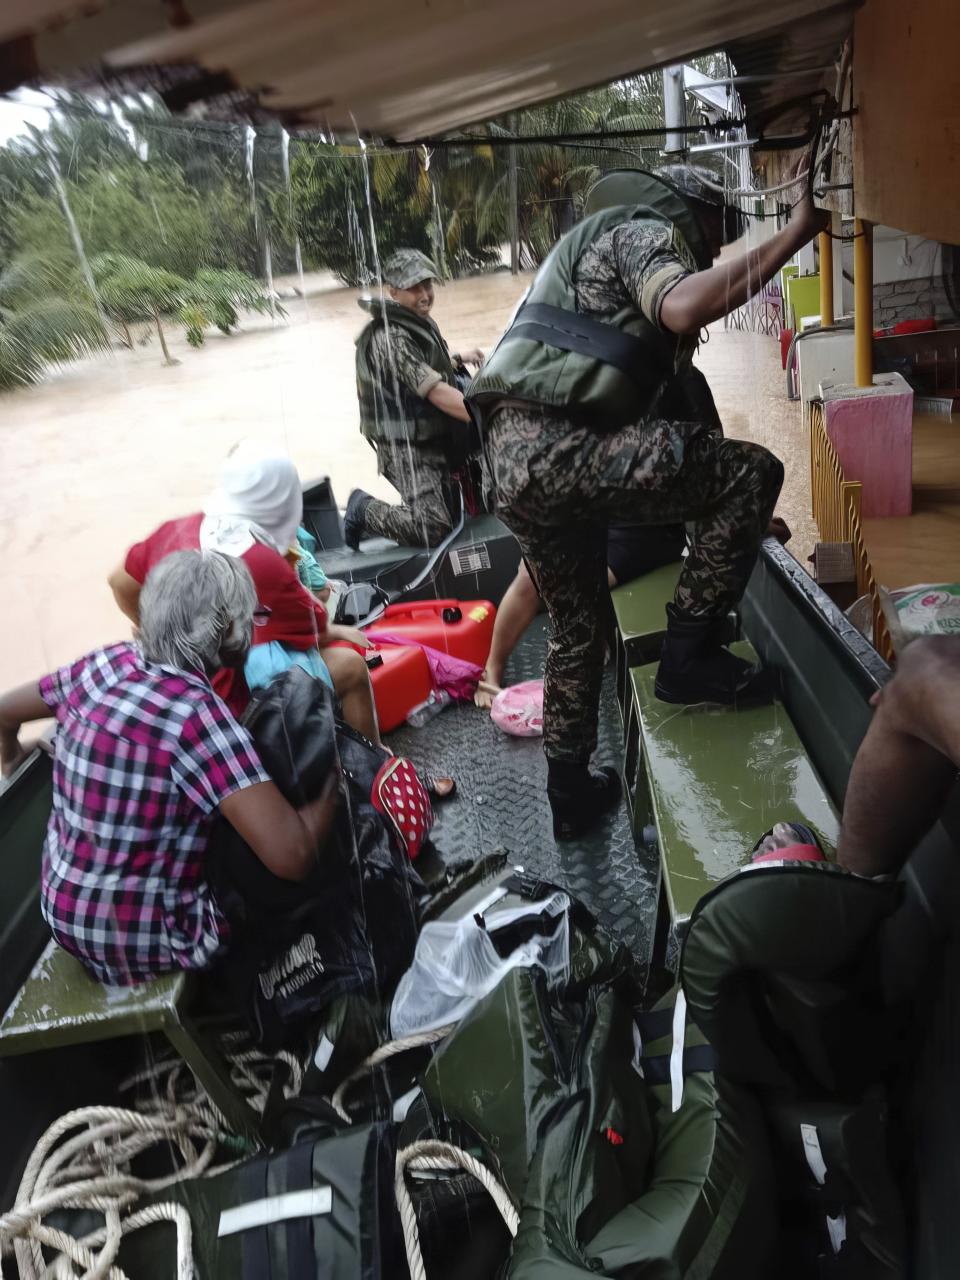 In this photo released by National Disaster Management Agency, the army evacuate residents on Chaah town in Segamat, in southern Johor state, Malaysia, Wednesday, March 1, 2023. Rescuers in boats plucked flood victims trapped on rooftops and hauled others to safety as incessant rain submerged homes and villages in parts of Malaysia, leading to over 26,000 people evacuated as of Thursday. (National Disaster Management Agency via AP)